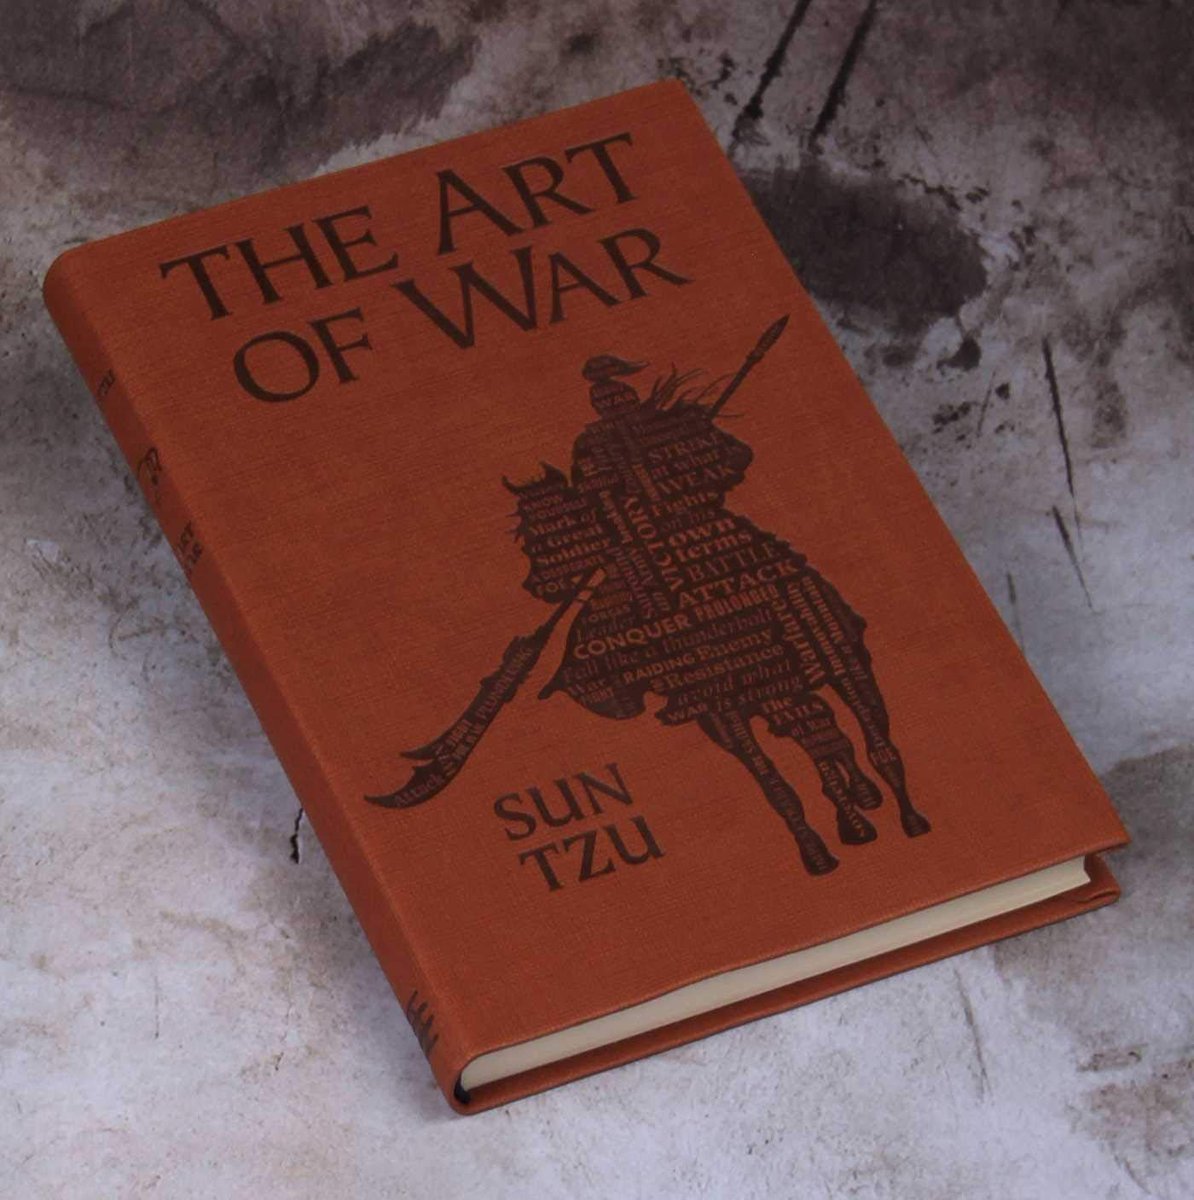 8 Life-Changing Lessons From The Book "The Art of War"Thread